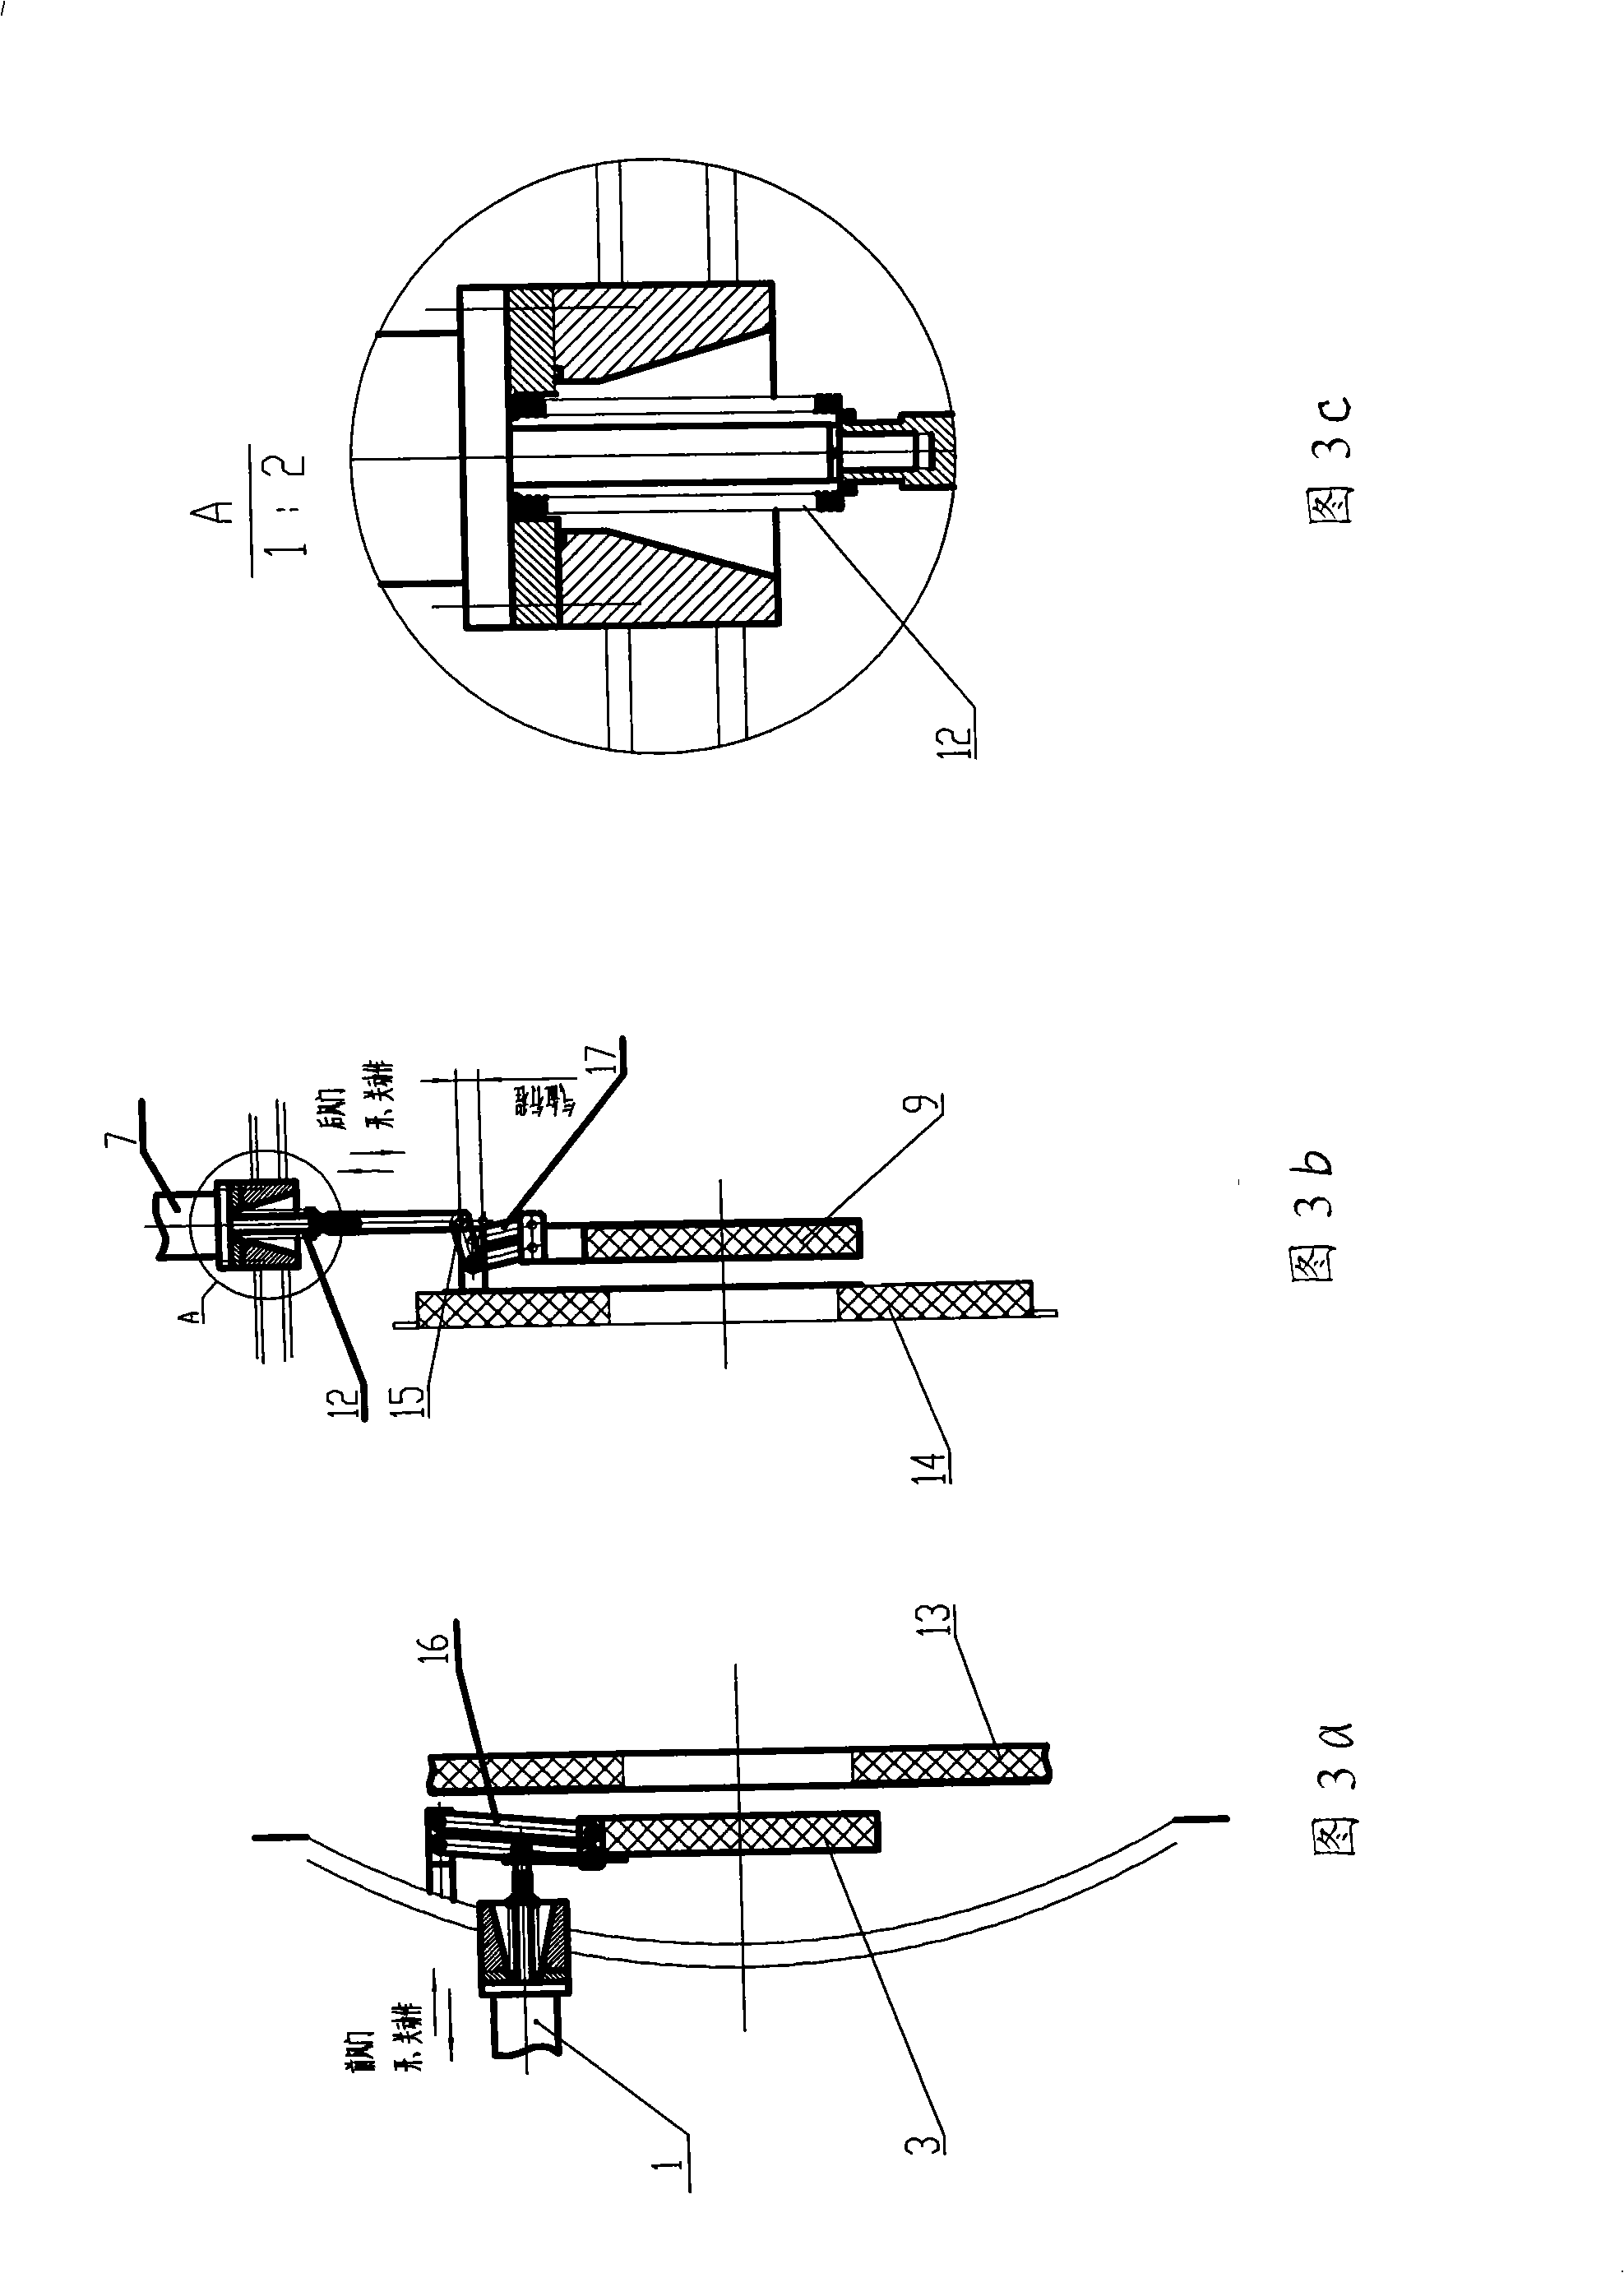 Nozzle cooling vacuum gas quenching furnace capable of convection heating